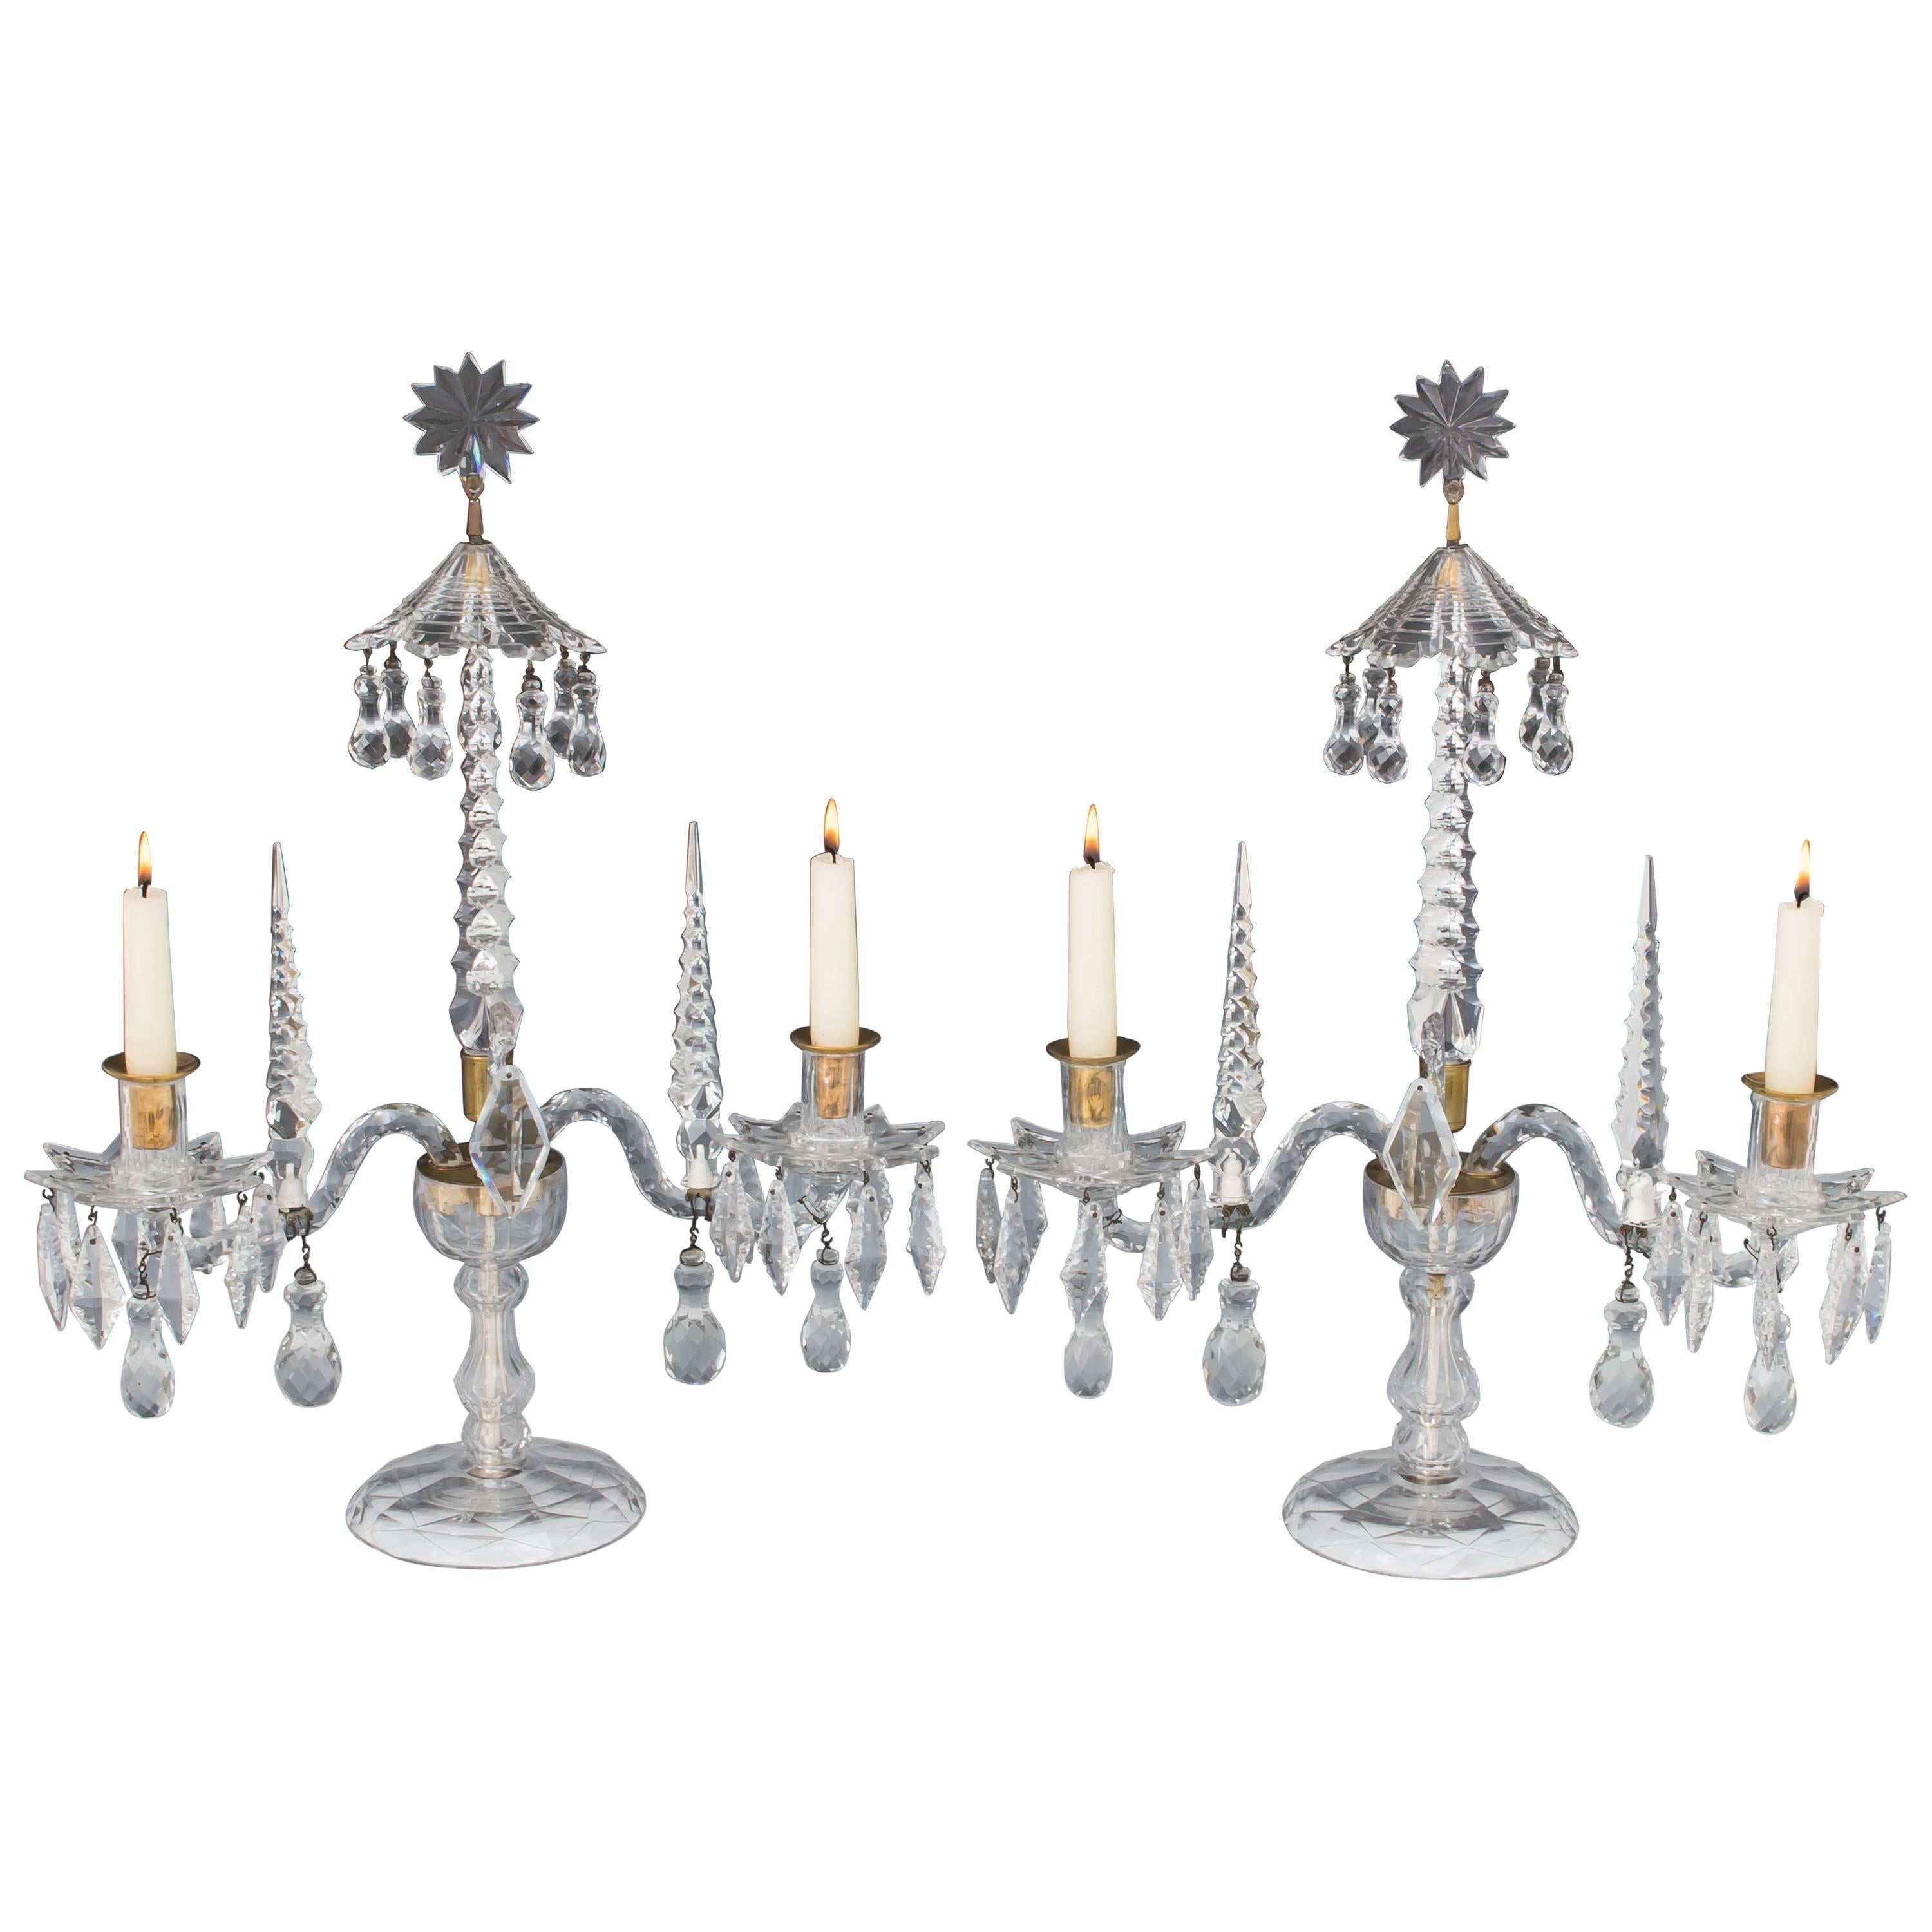 Rare Pair of George II English Cut-Glass Candelabra For Sale